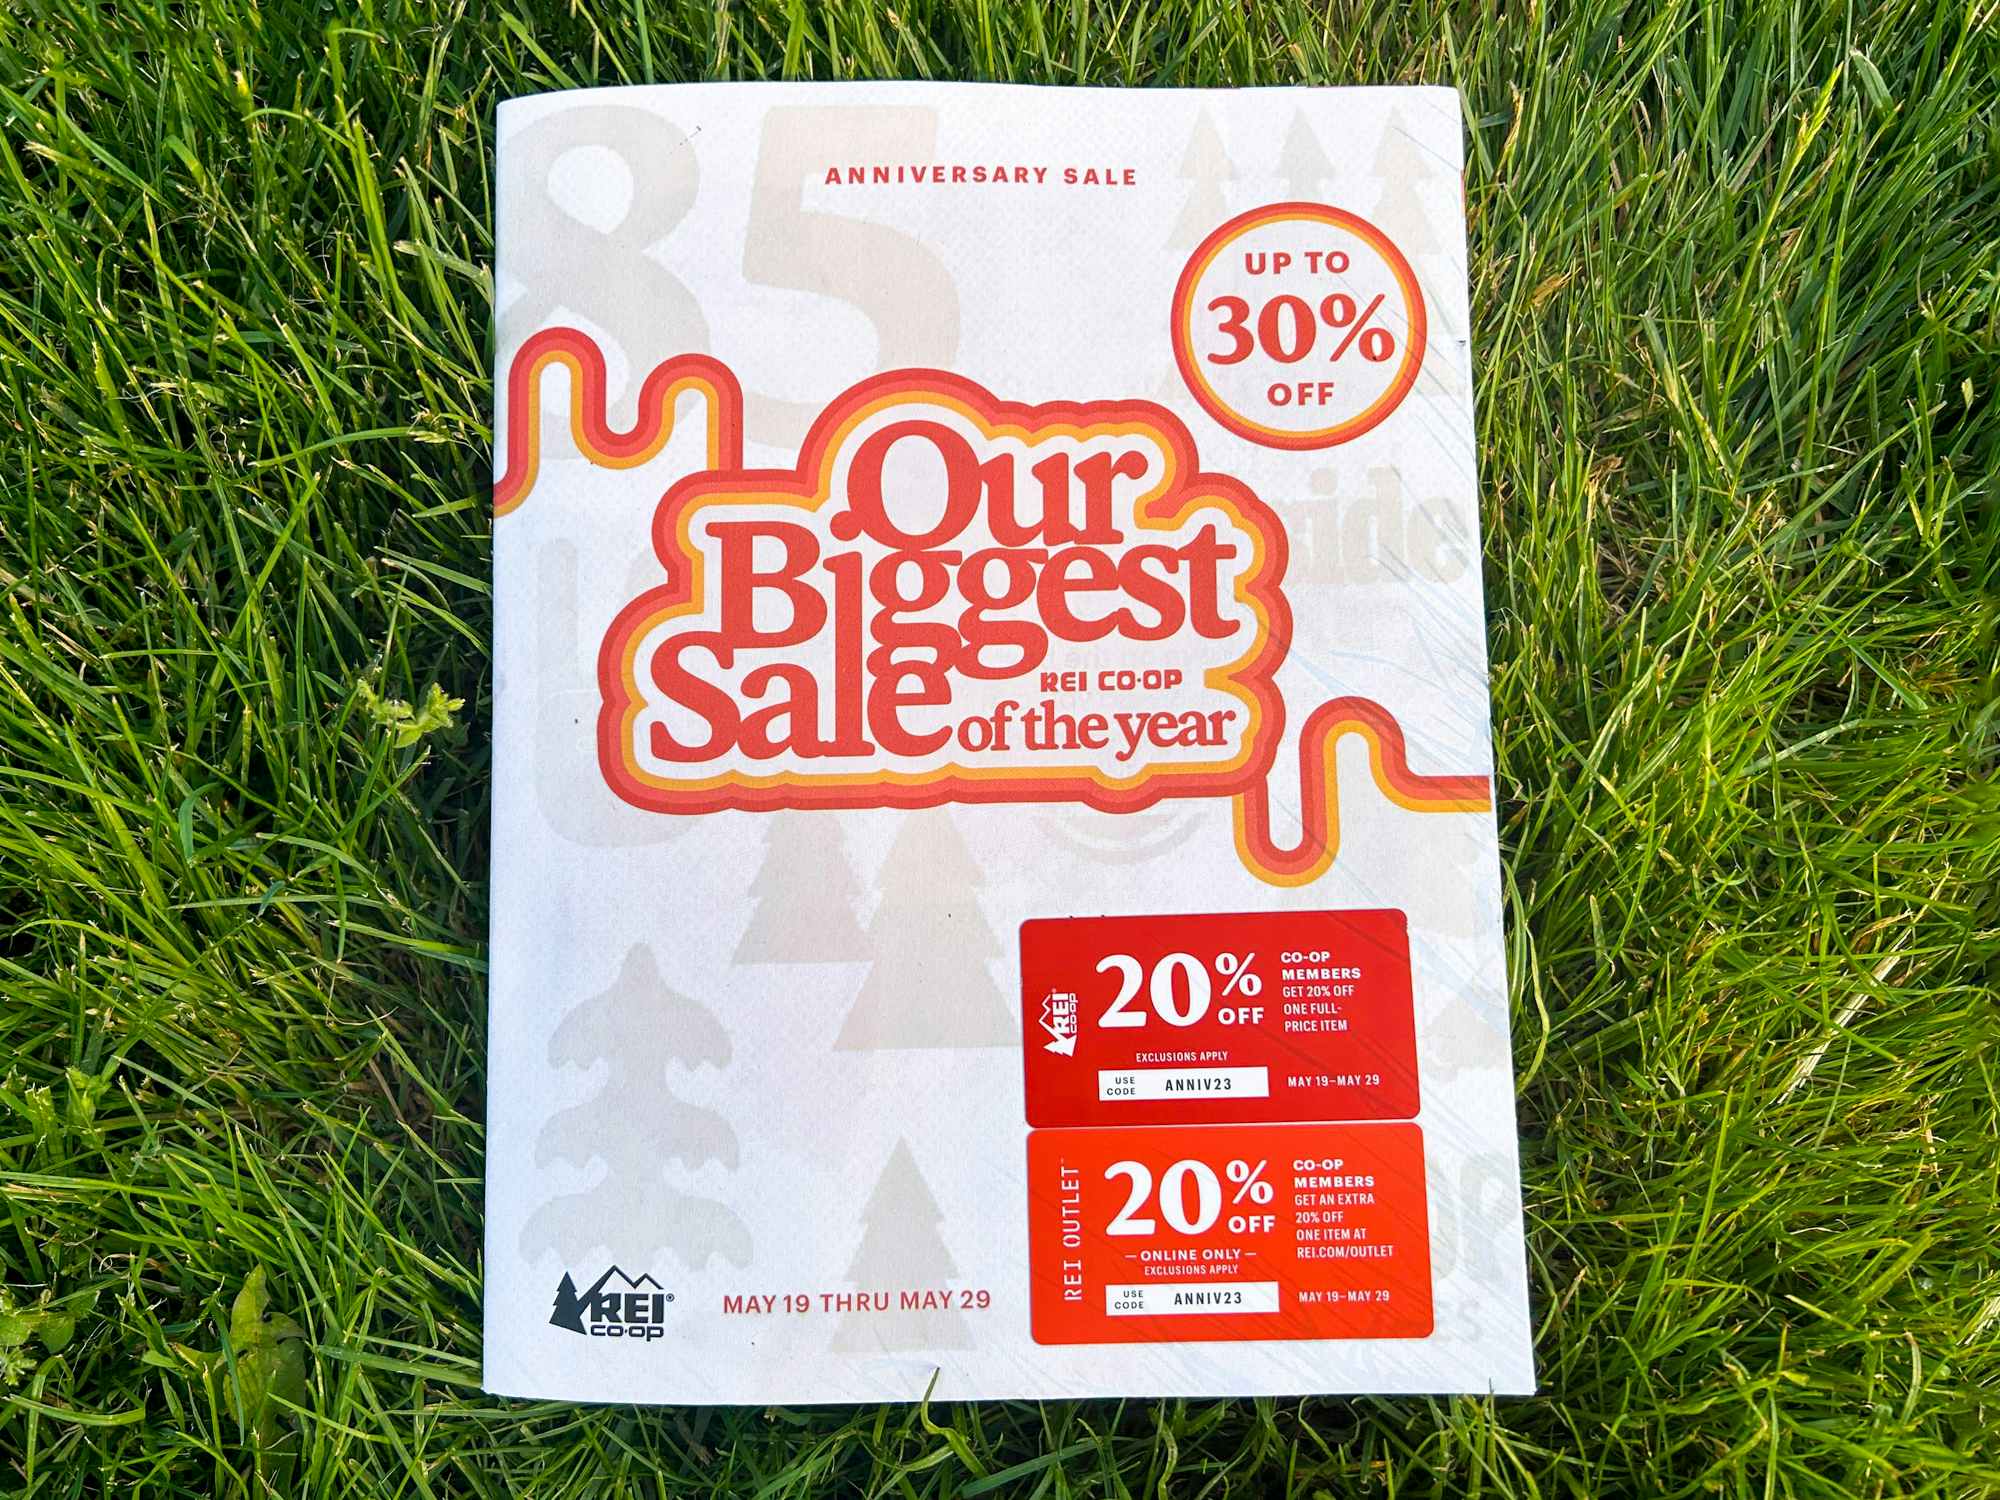 A REI Co-op mailer for their Anniversary Sale